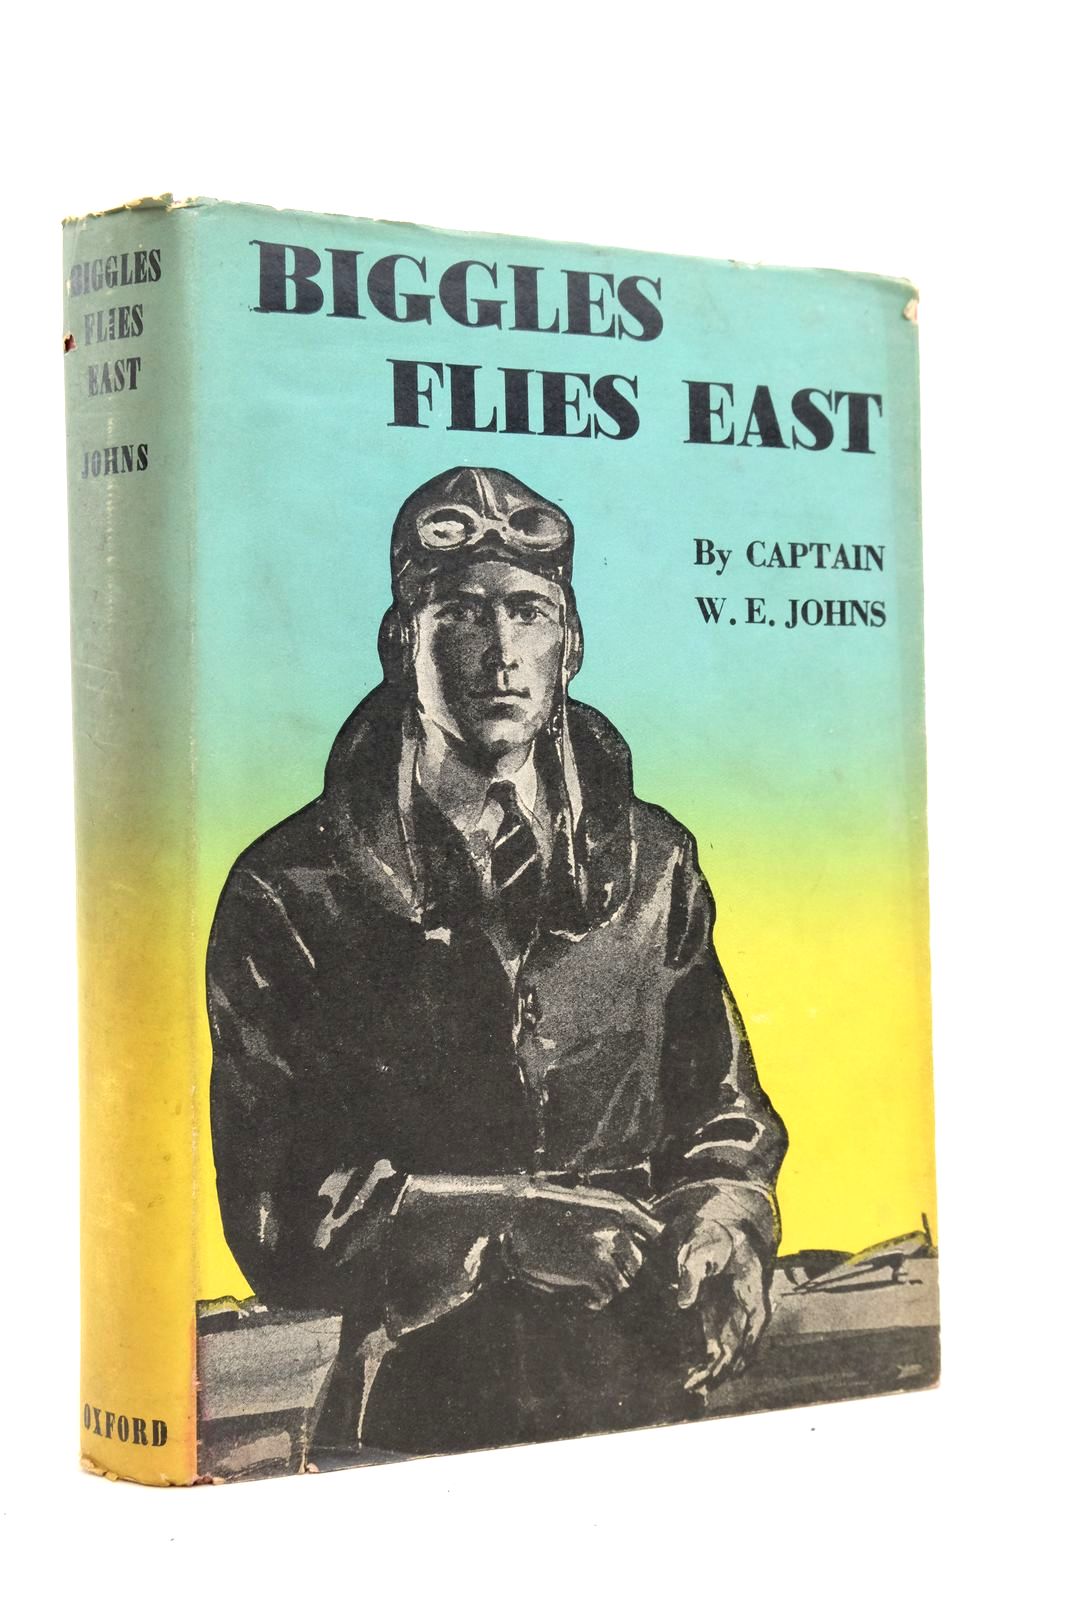 Photo of BIGGLES FLIES EAST written by Johns, W.E. published by Oxford University Press, Geoffrey Cumberlege (STOCK CODE: 2139722)  for sale by Stella & Rose's Books